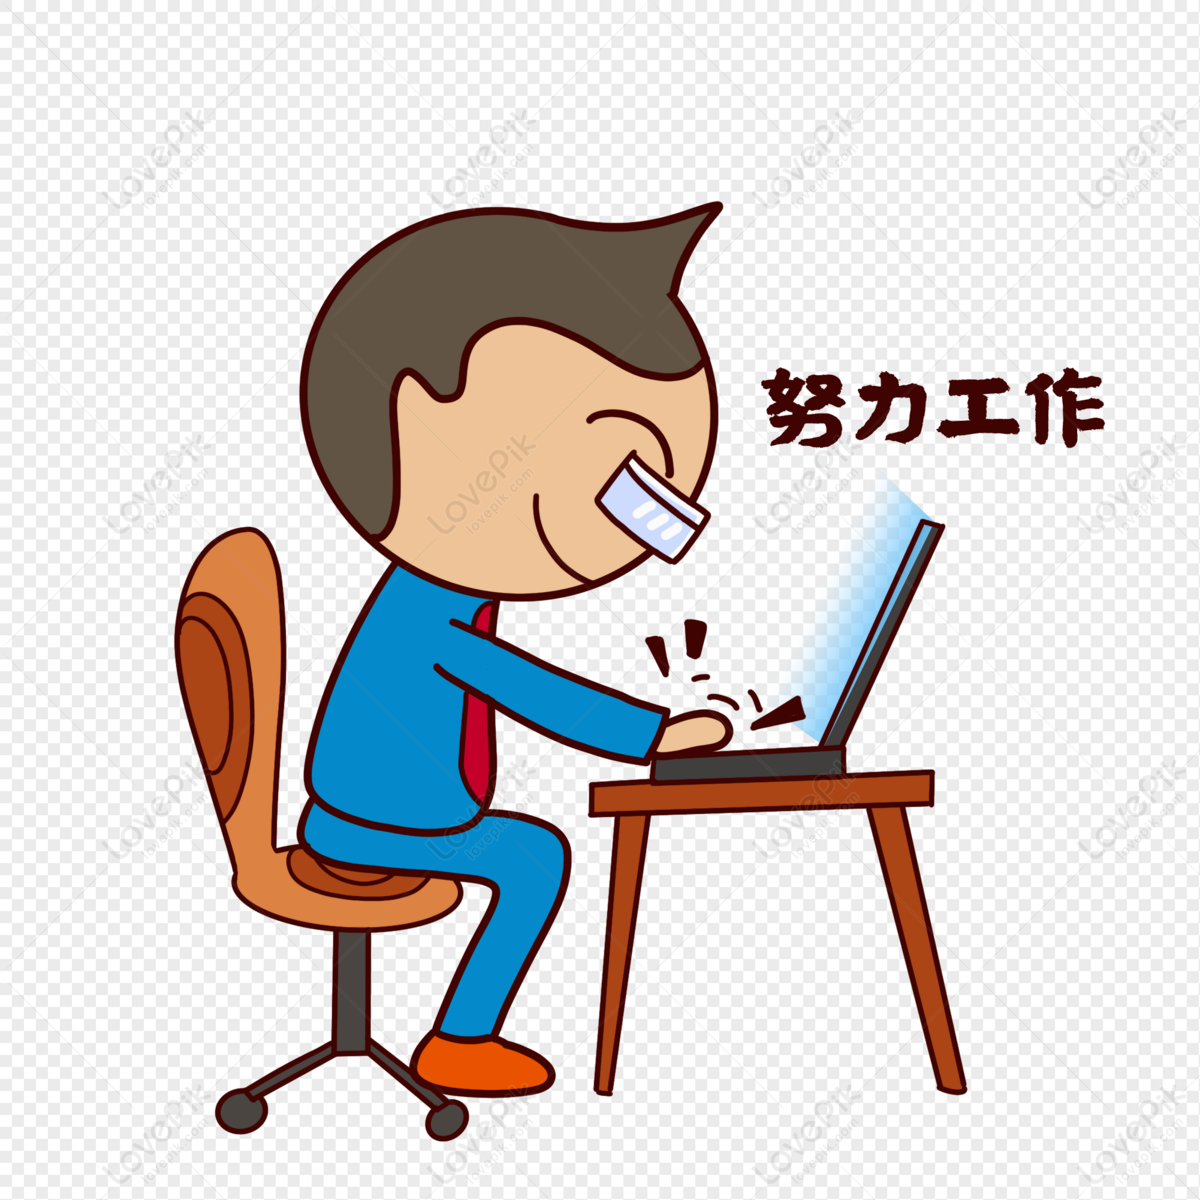 Cartoon Man Working Hard Illustration PNG Transparent And Clipart Image For  Free Download - Lovepik | 401357816